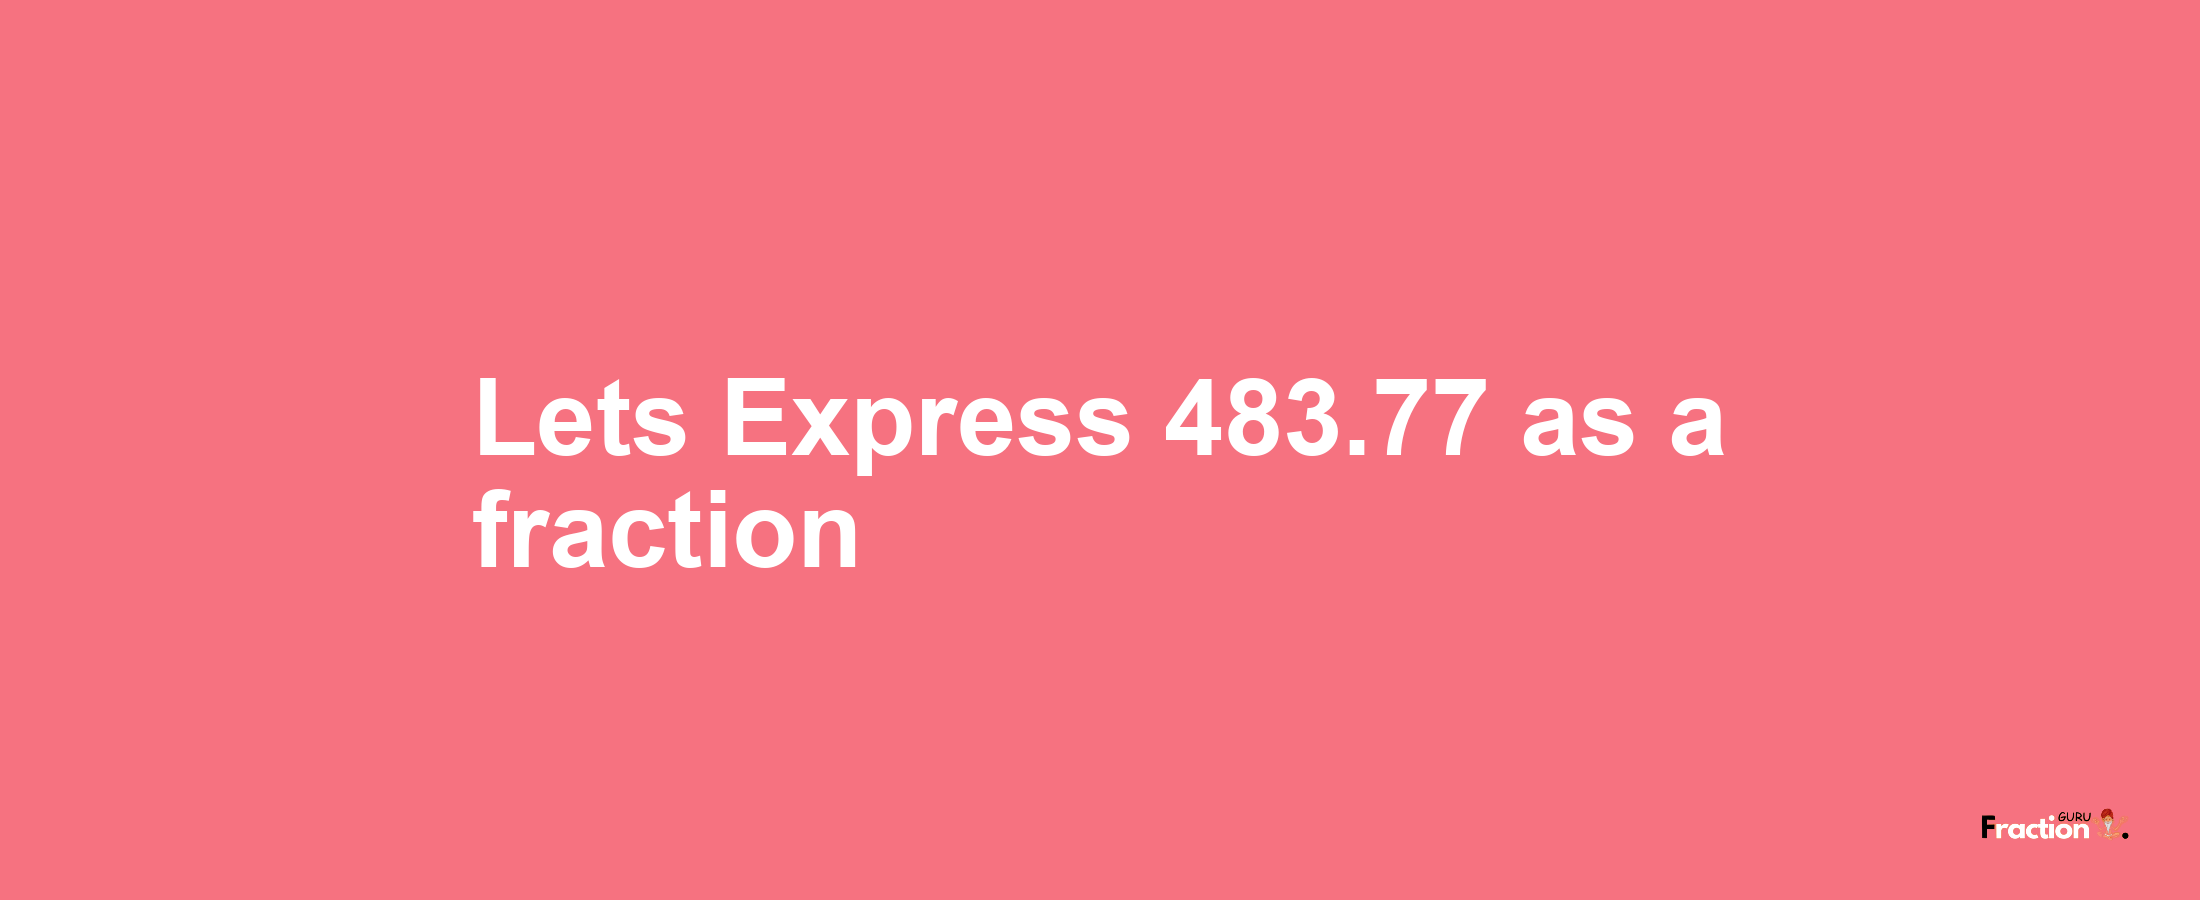 Lets Express 483.77 as afraction